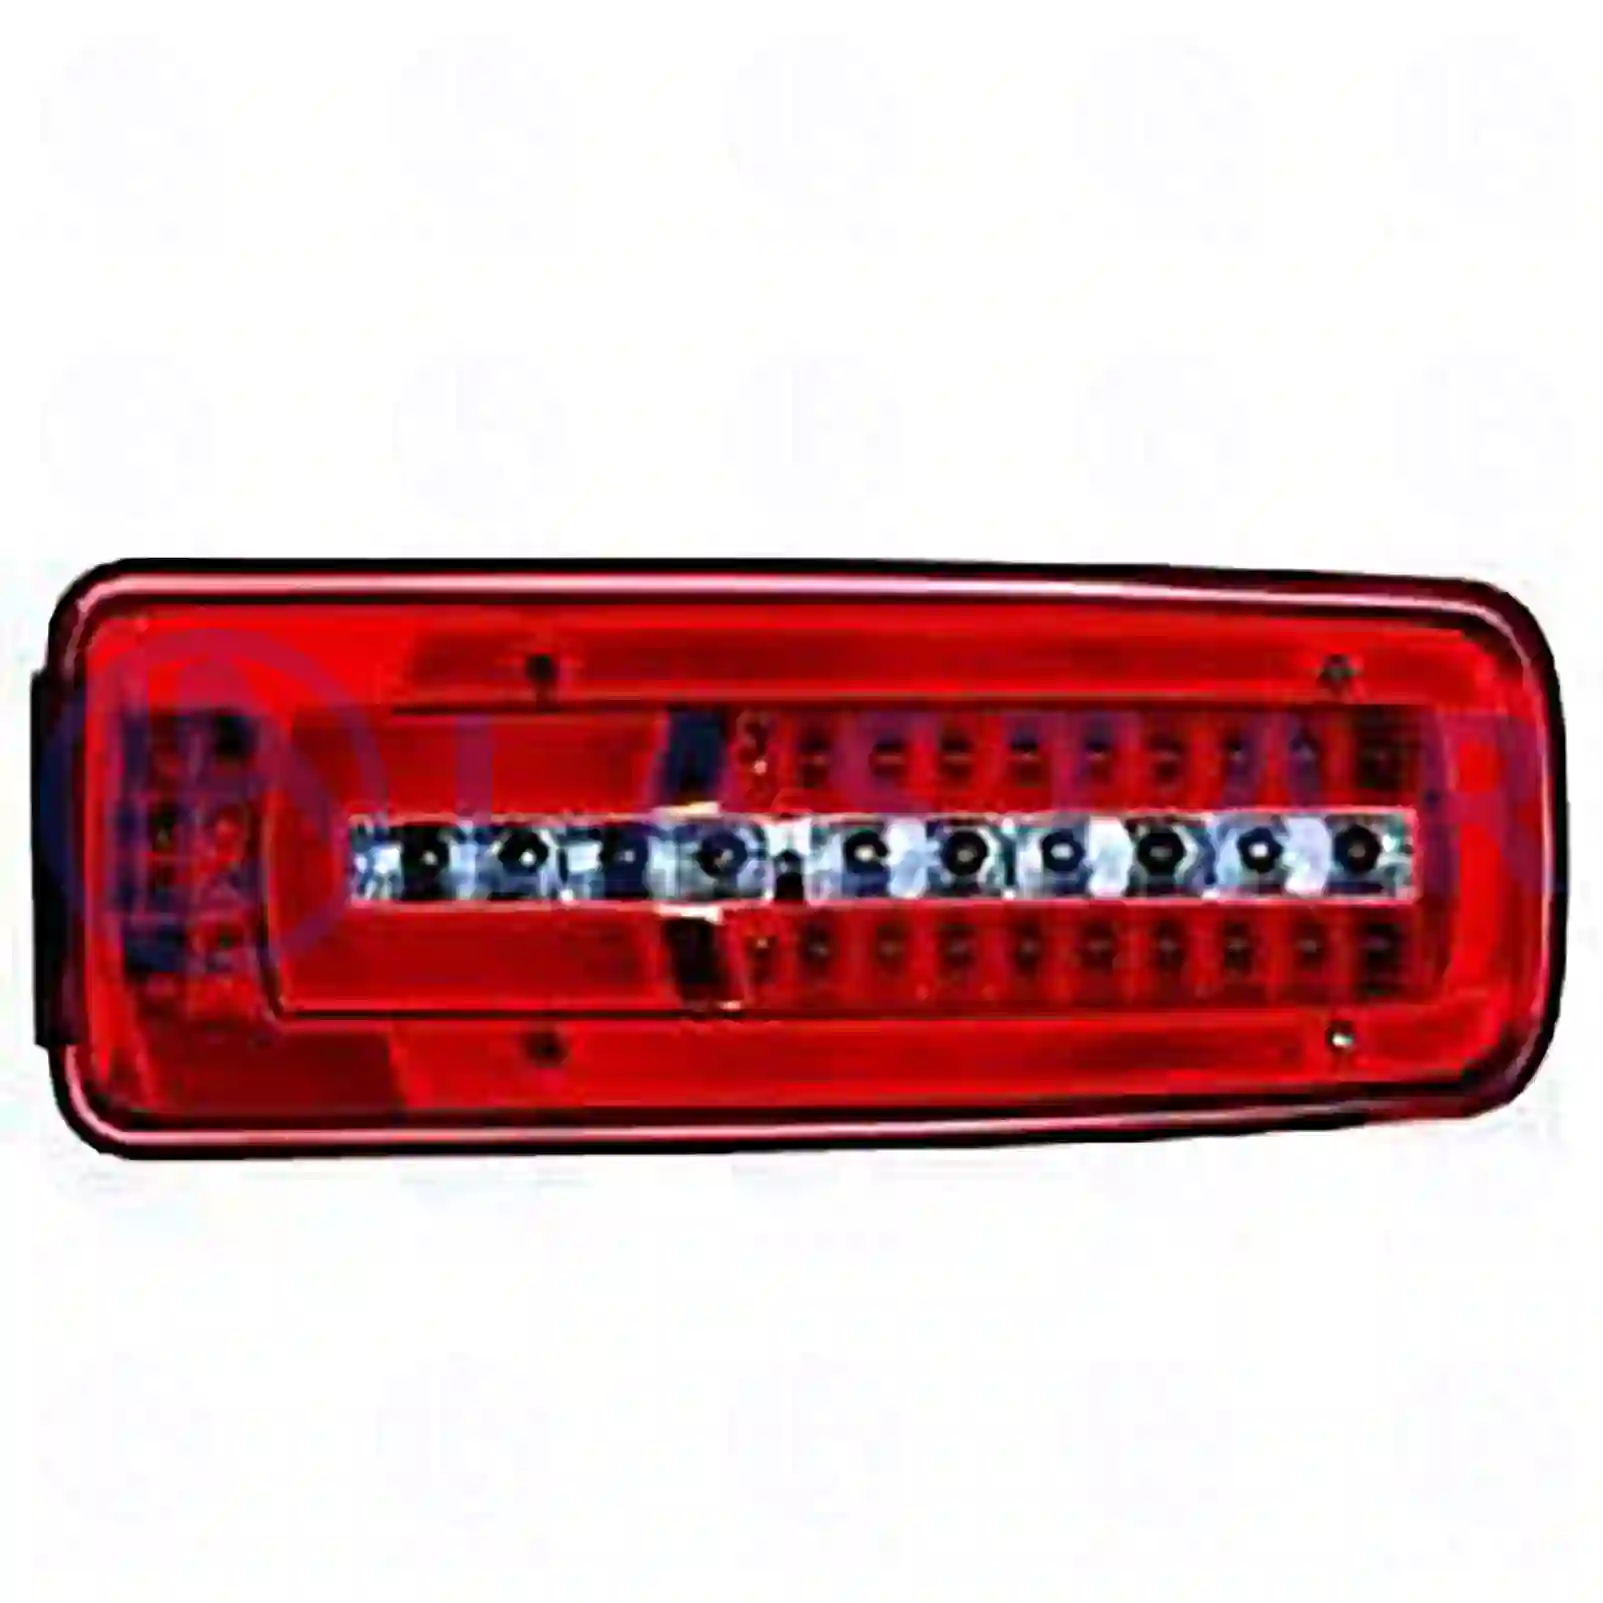 Tail lamp, right, 77712602, 2007611 ||  77712602 Lastar Spare Part | Truck Spare Parts, Auotomotive Spare Parts Tail lamp, right, 77712602, 2007611 ||  77712602 Lastar Spare Part | Truck Spare Parts, Auotomotive Spare Parts